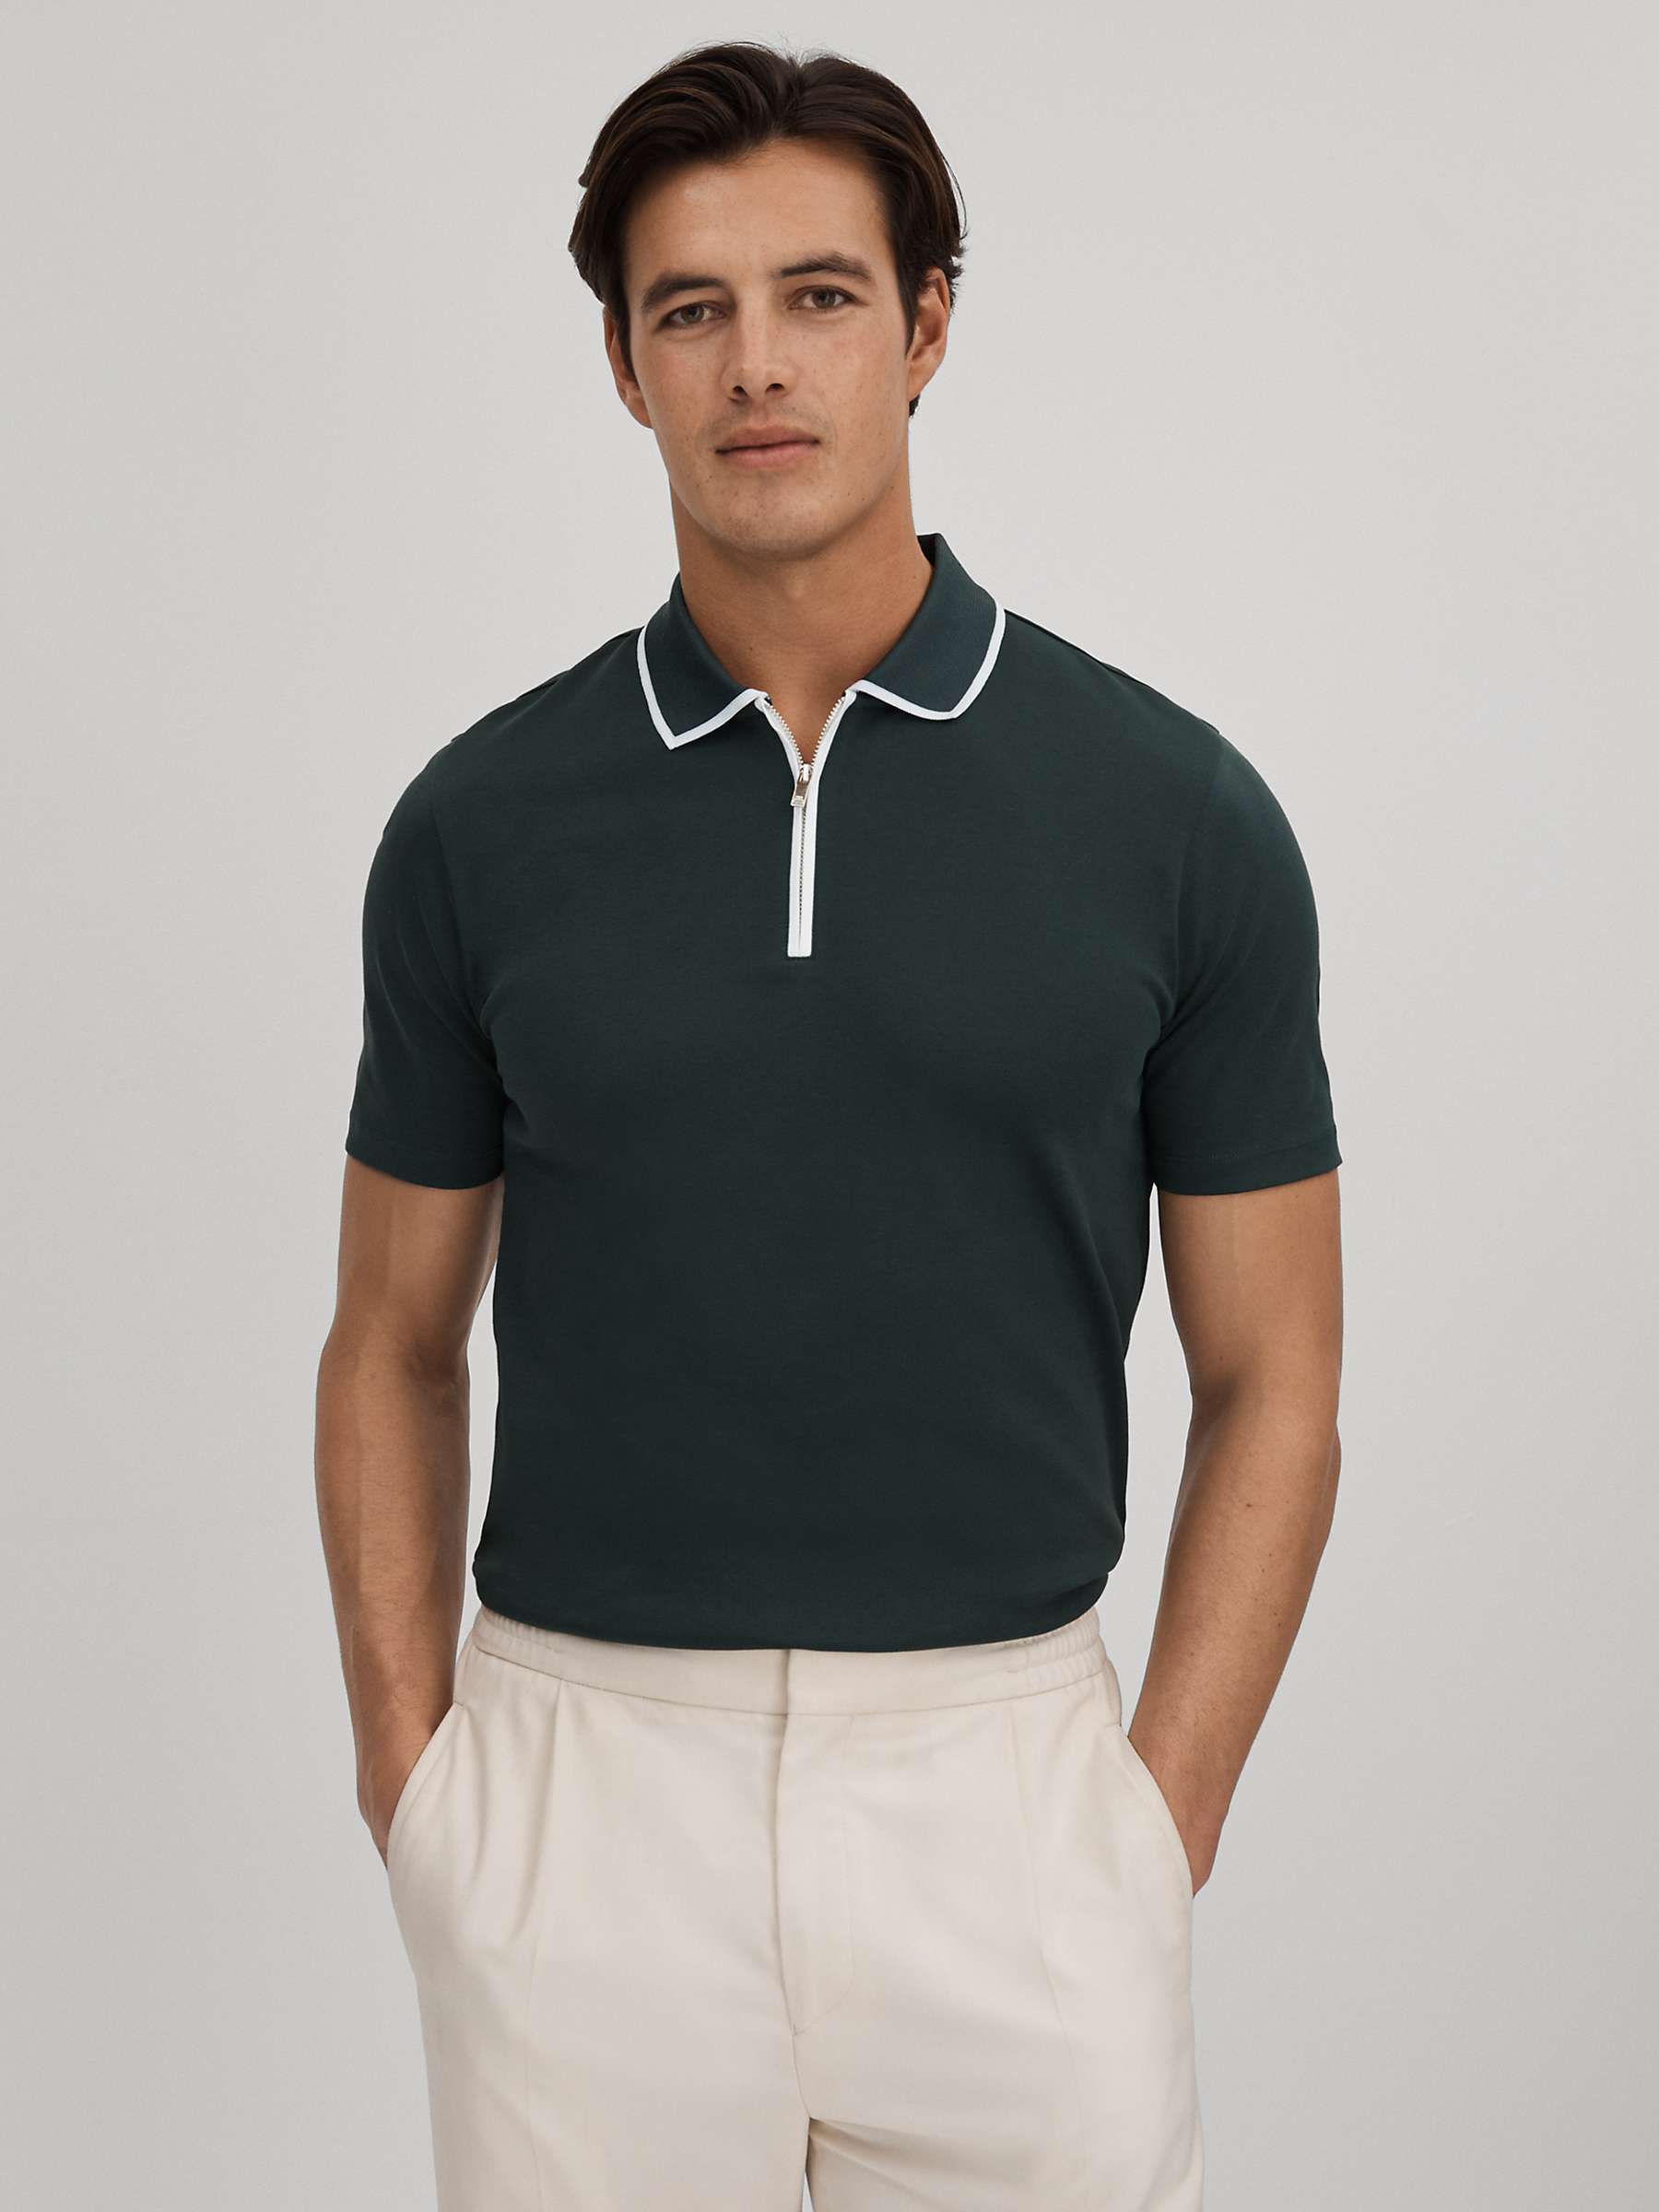 Buy Reiss Cannes Short Sleeve Cotton Ribbed Polo Shirt Online at johnlewis.com